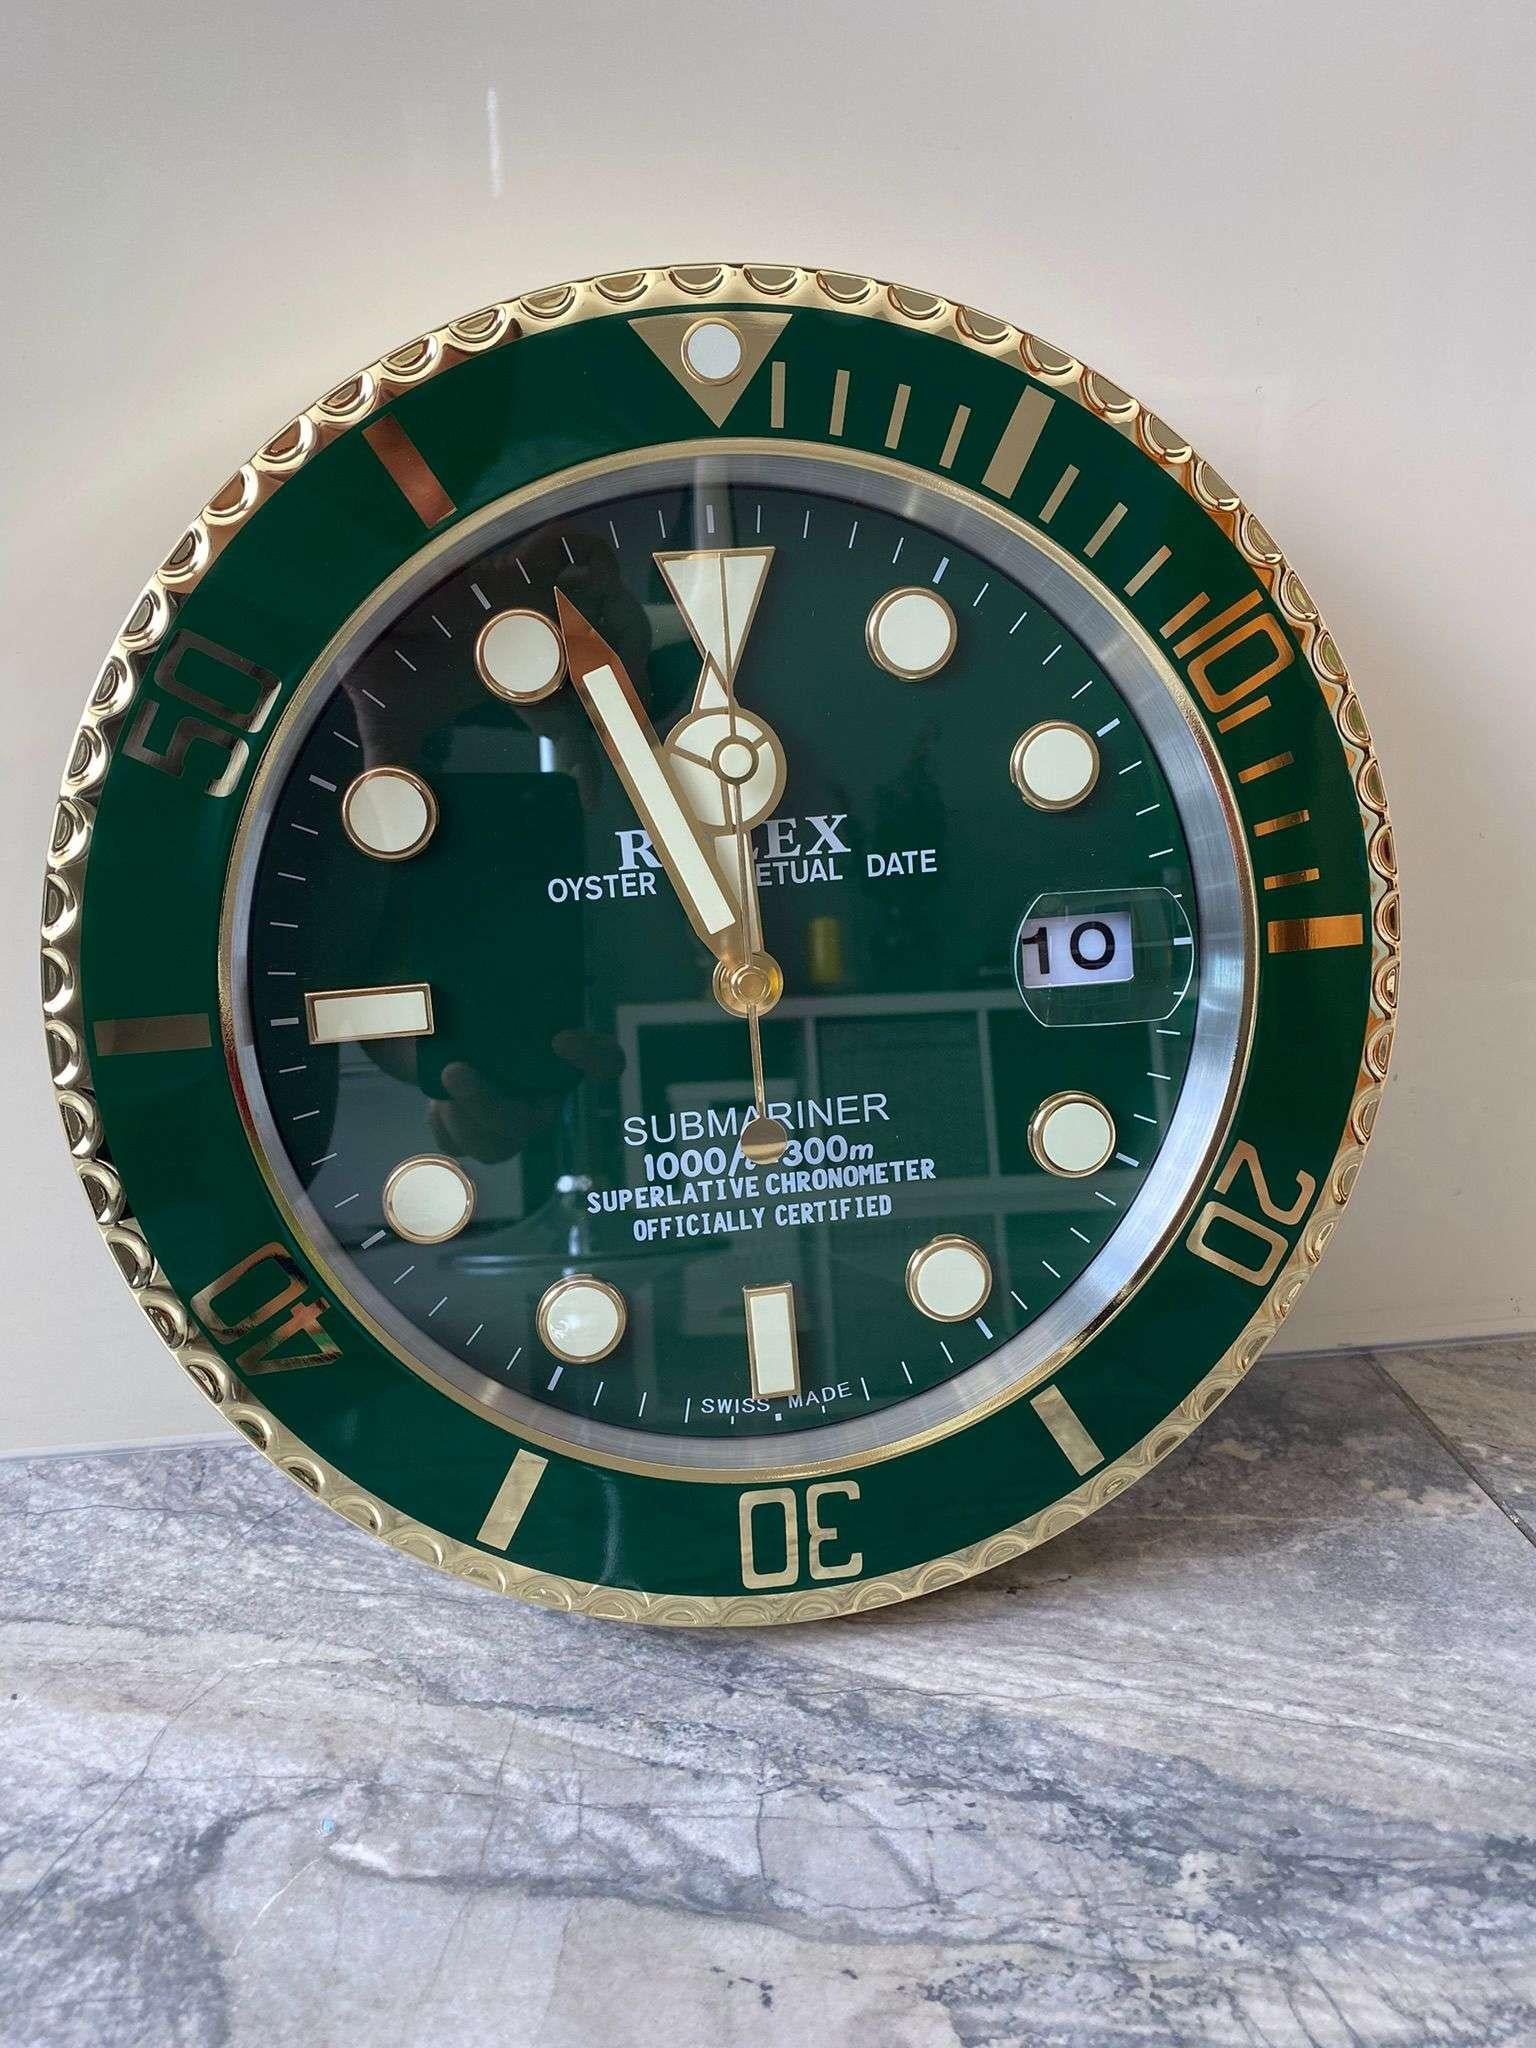 ROLEX Officially Certified Oyster Perpetual Gold & Green Submariner Wall Clock 
Good condition, working.
Free international shipping.